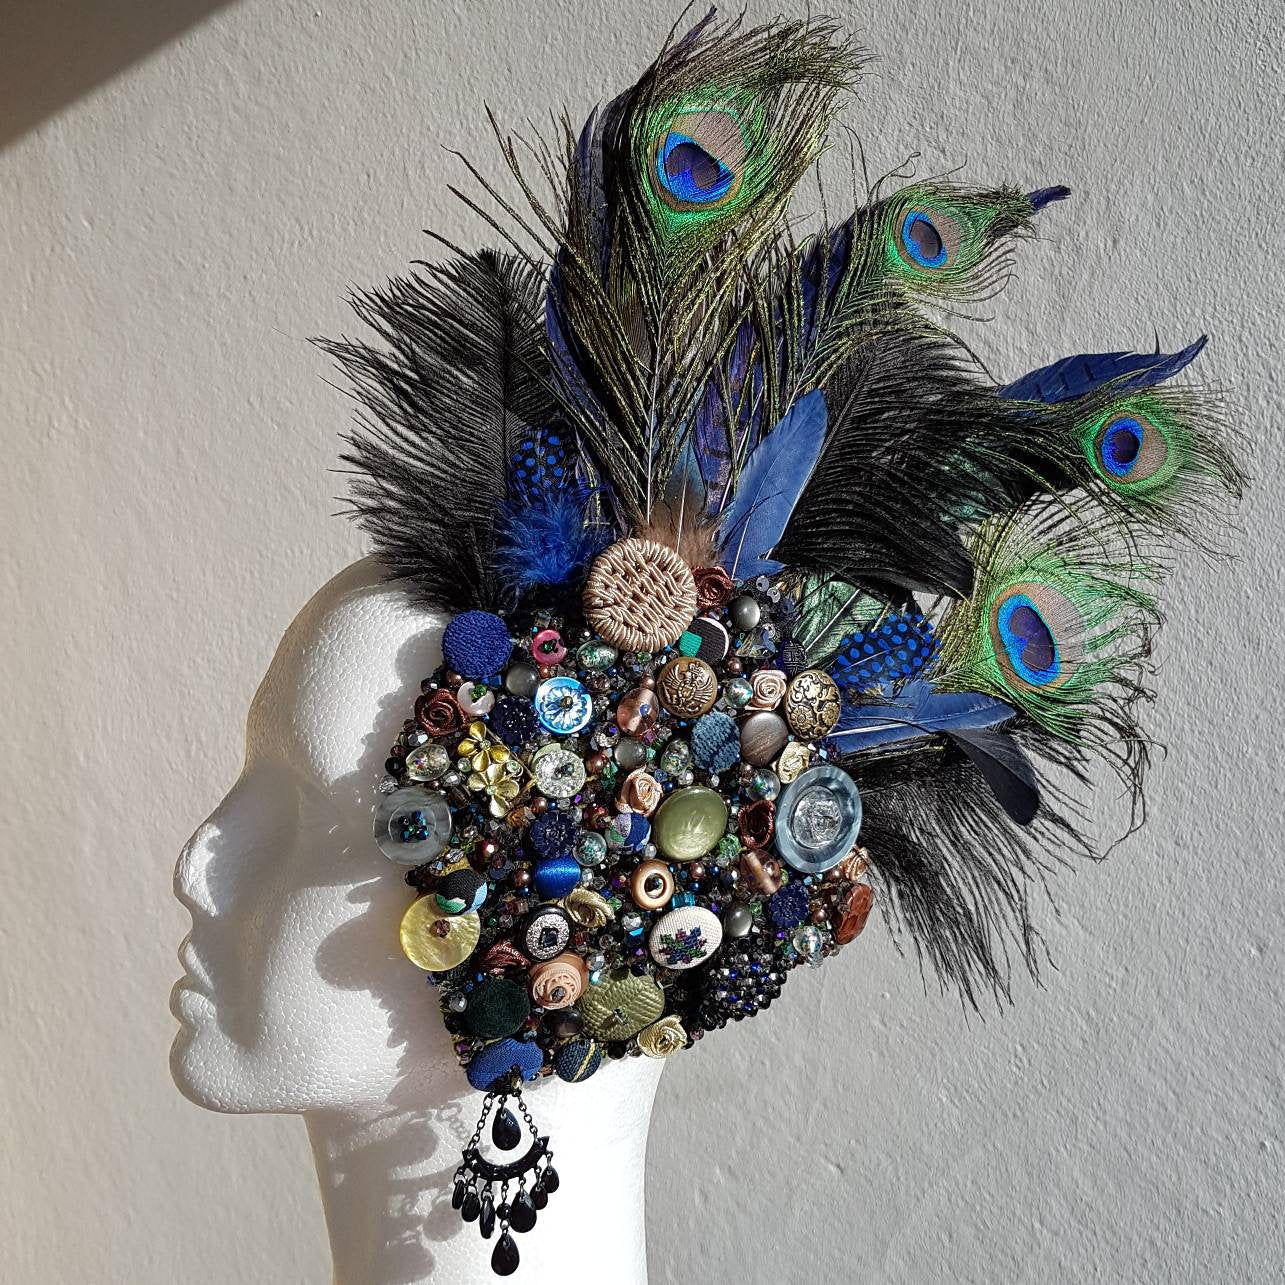 Harlequin Collection: The Harlequin Kingfisher hair ornament